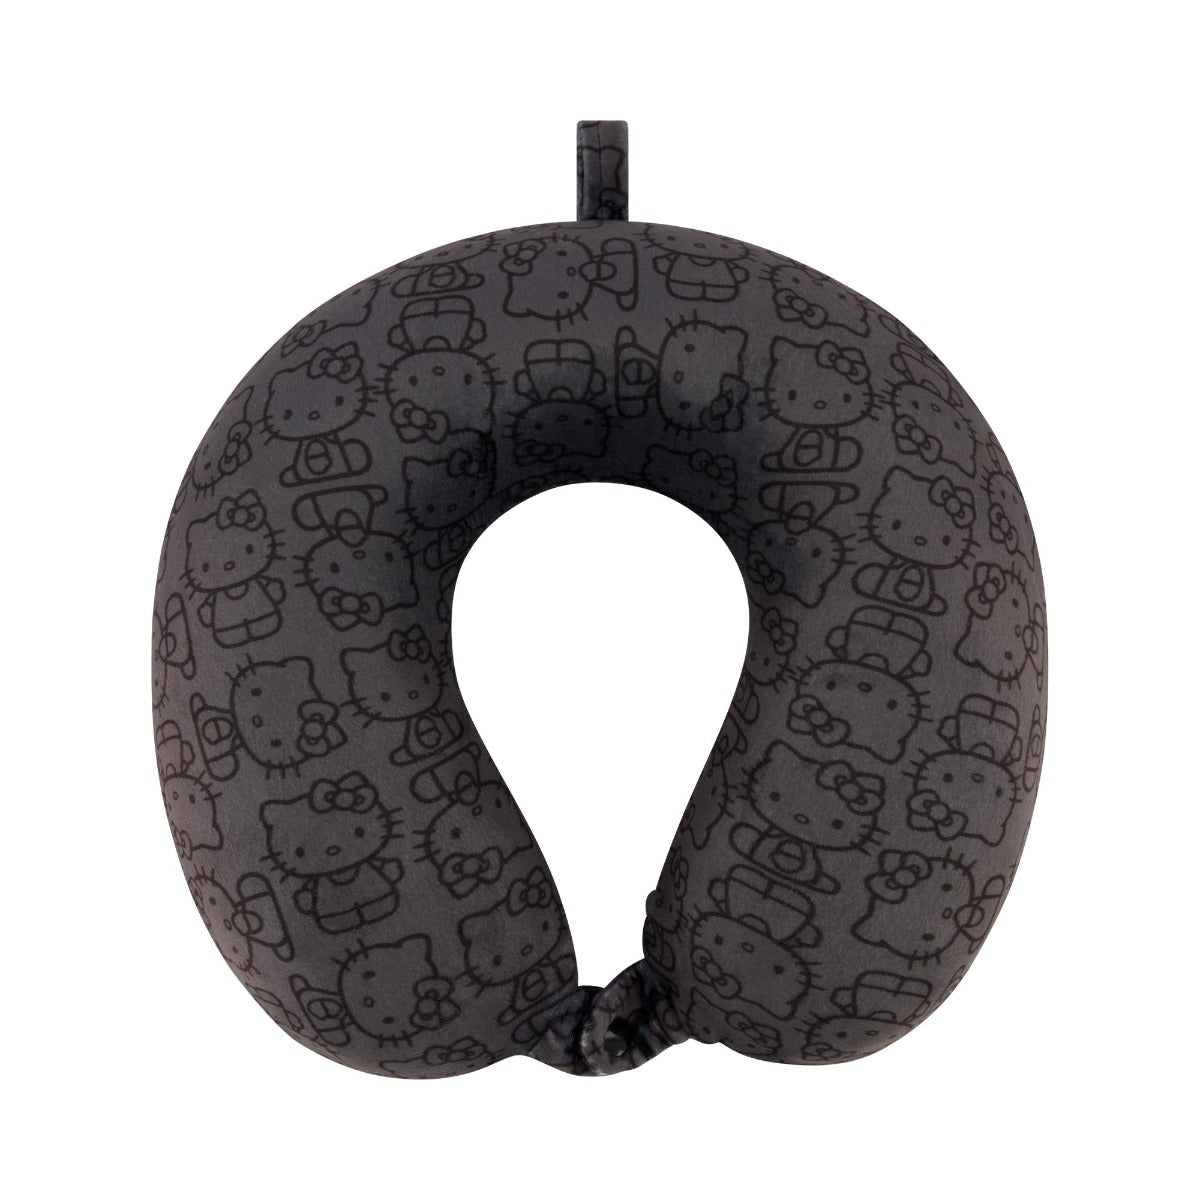 Black Ful Hello Kitty all over icon memory foam travel neck pillow